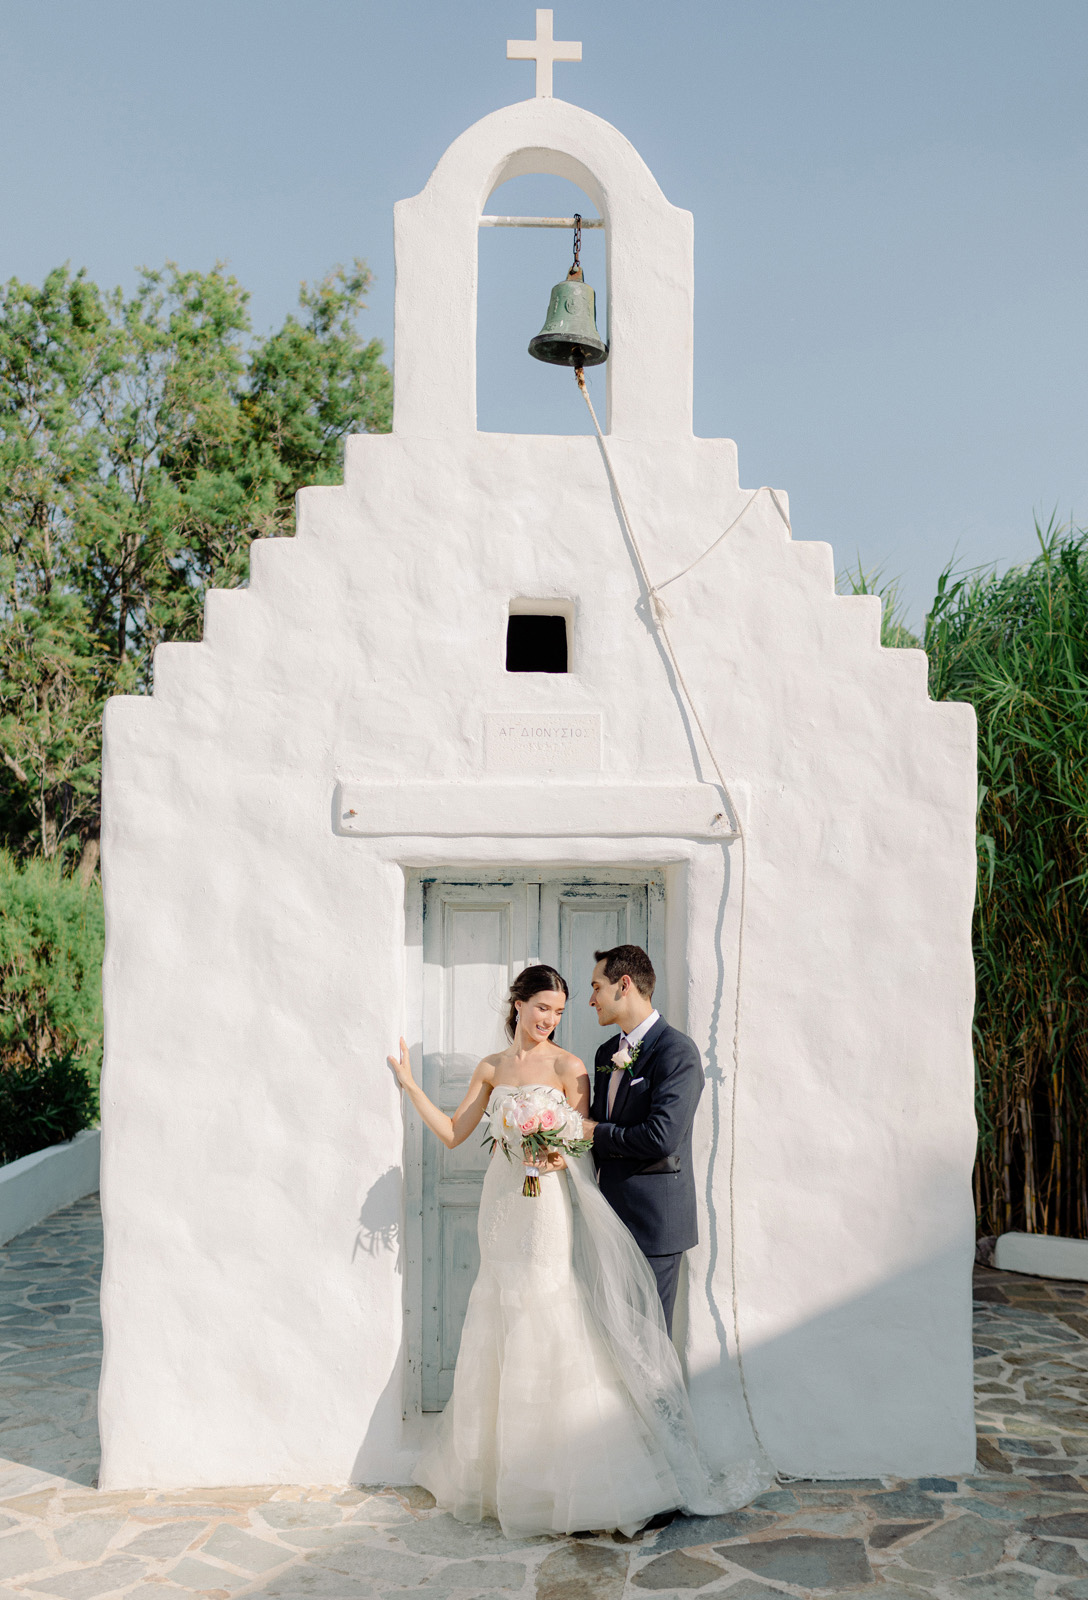 Athens wedding photographer captures couple in front of white washed chapel hugging, wedding in Greece